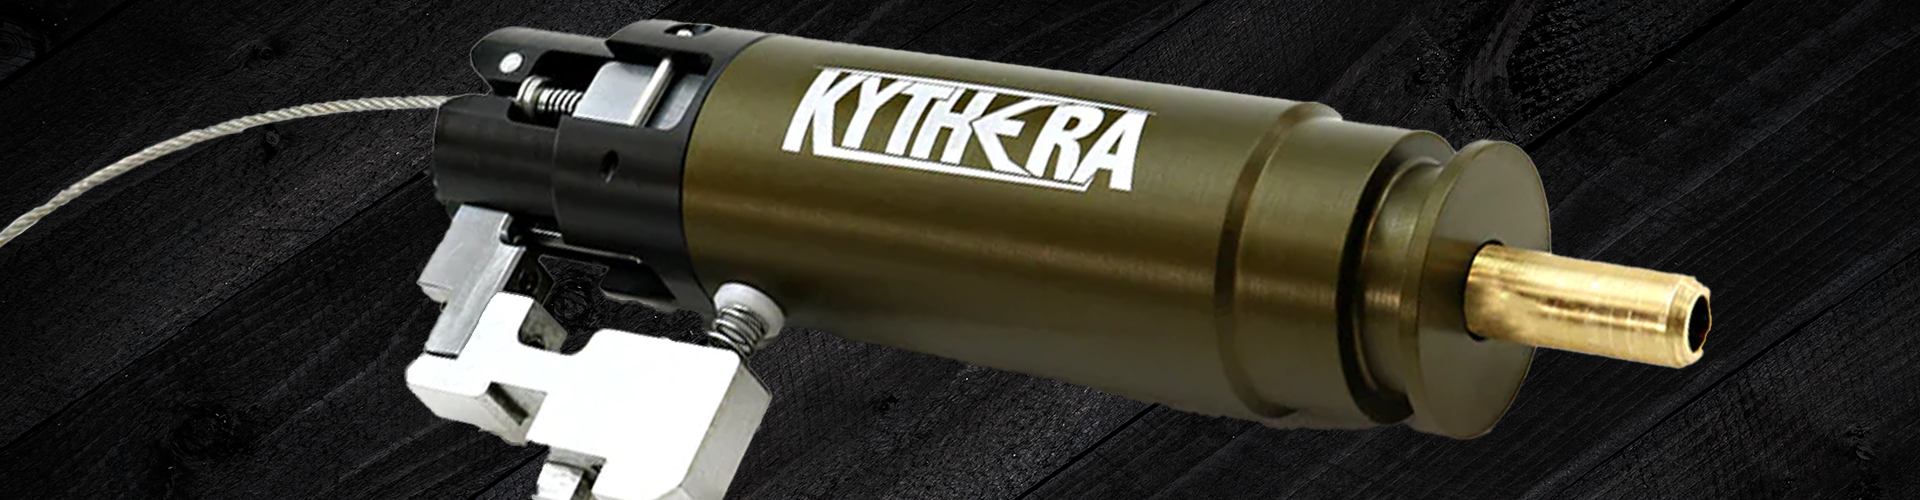 Polarstar Kythera HPA Engine for Airsoft Rifles and Airsoft Sniper Rifles